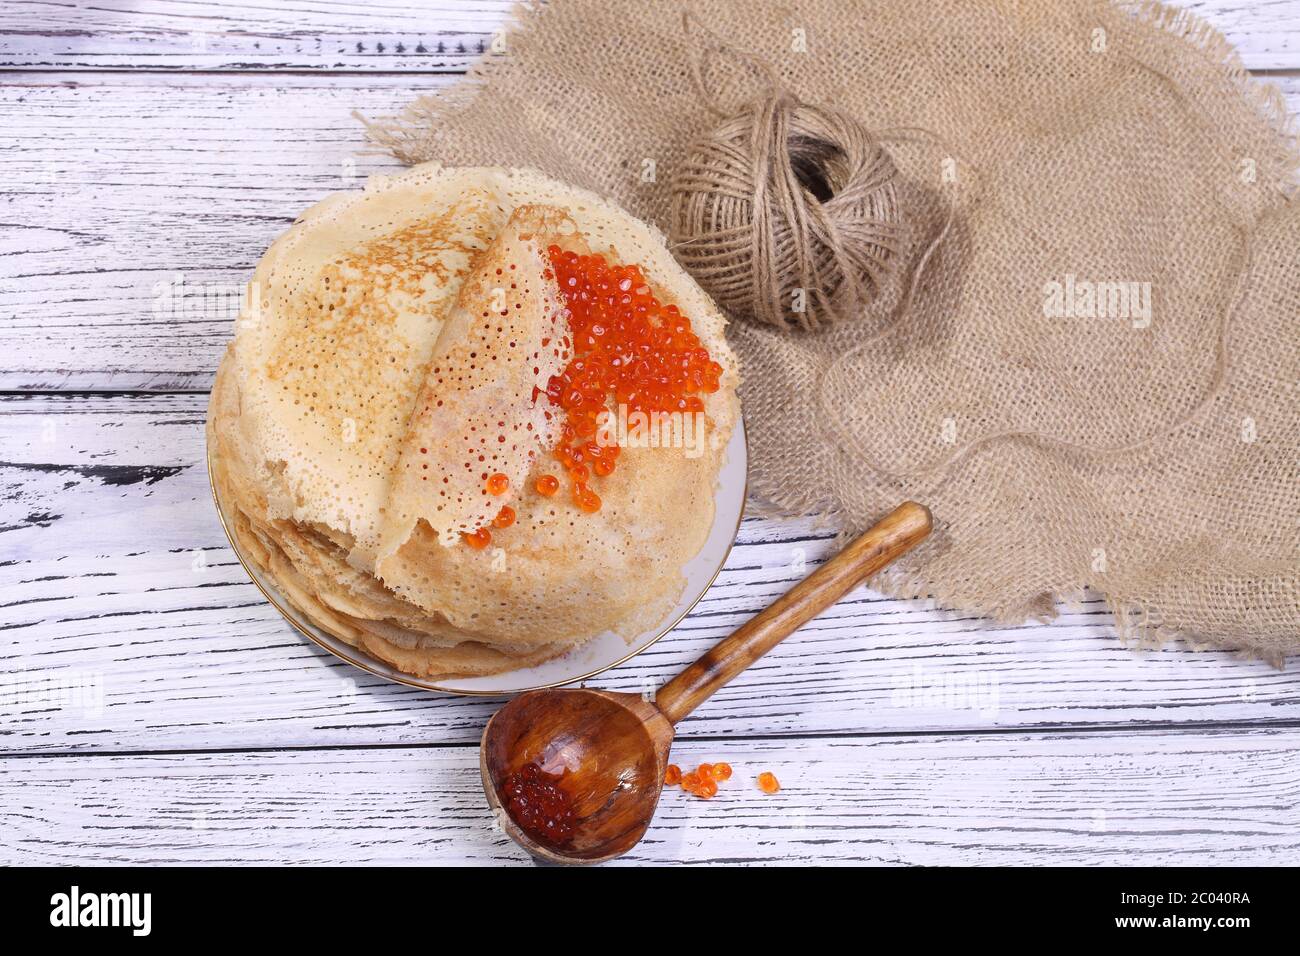 https://c8.alamy.com/comp/2C040RA/pancakes-with-red-caviar-and-a-wooden-spoon-2C040RA.jpg